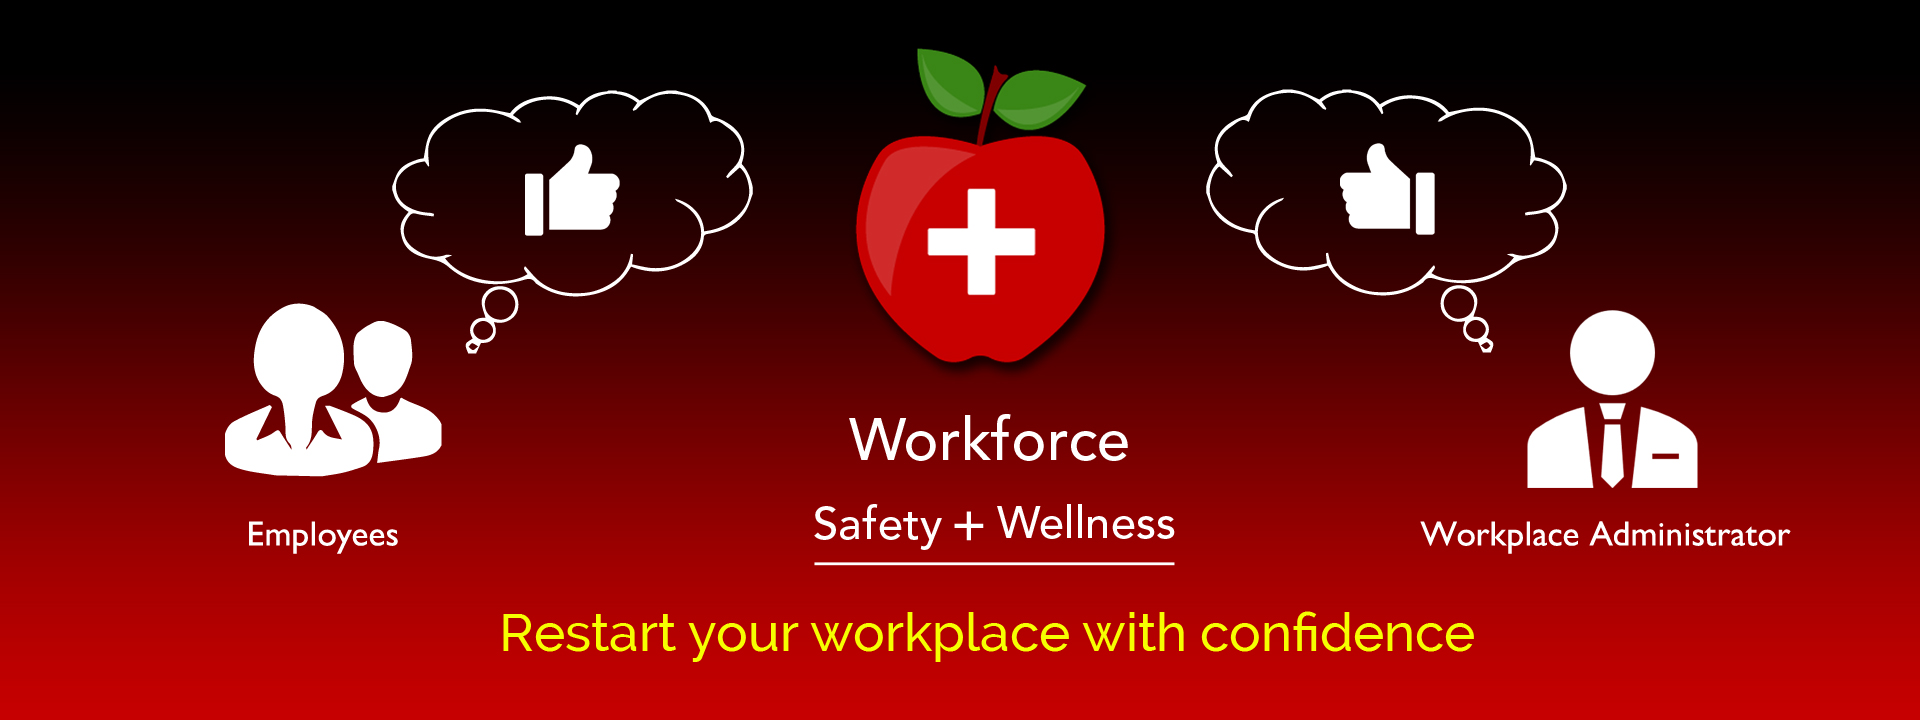 Ensure your workforce safety and restart your workplace with confidence with the WSW application – Prosares Solutions Pvt. Ltd.